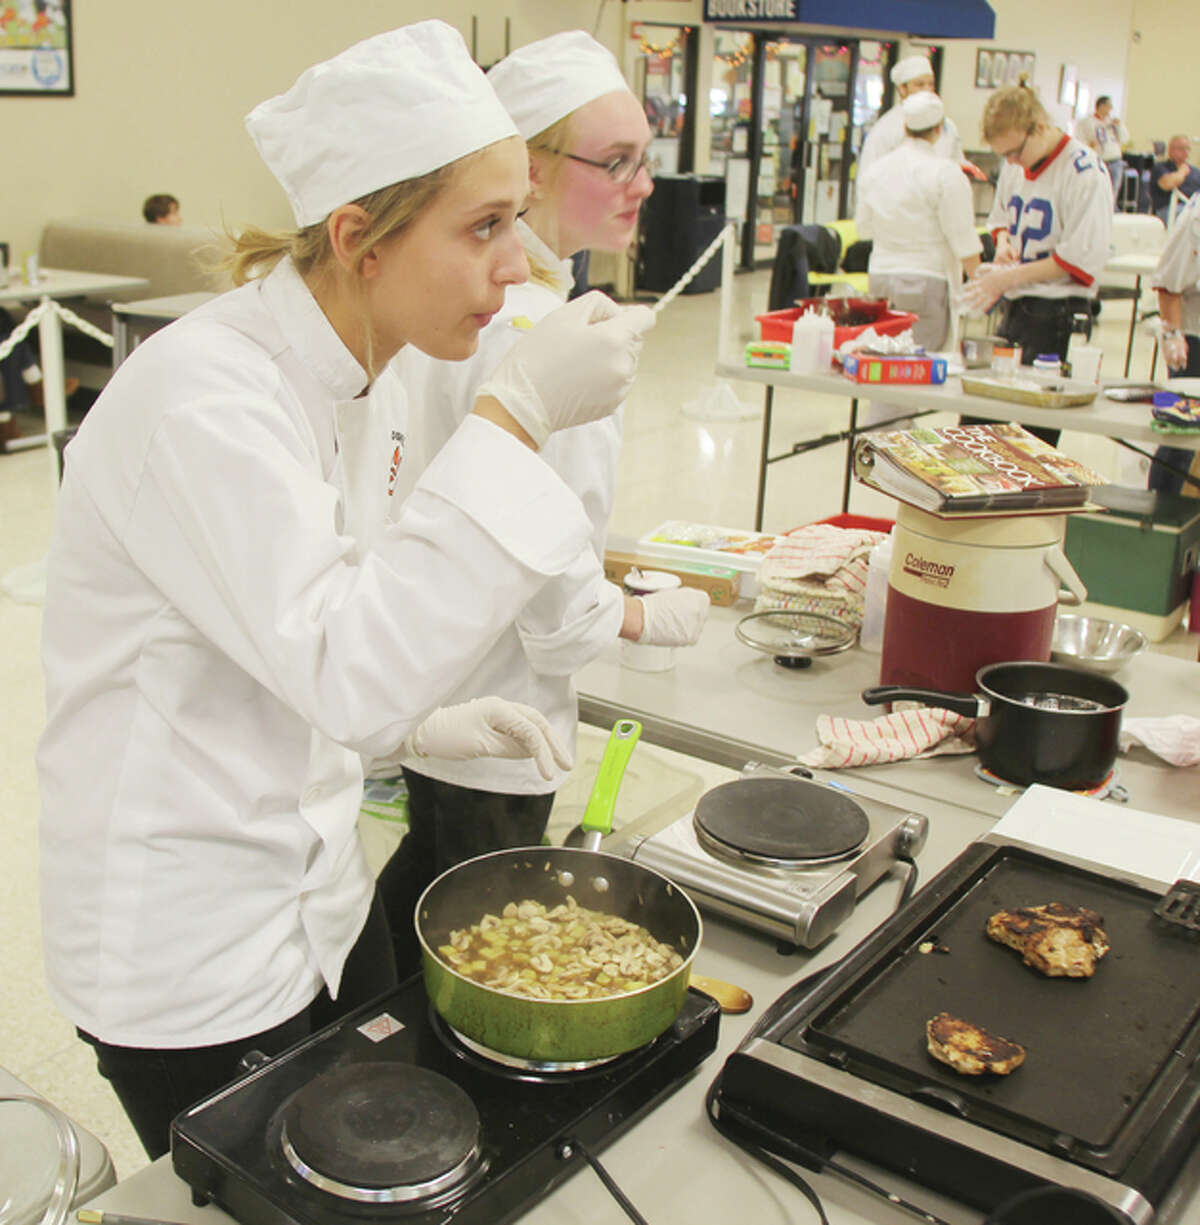 Edwardsville High School student Elizabeth Gaumer, left, tastes a dish while Laura Forsyth works on another dish during the Platinum Chef competition Wednesday at the Southwestern Illinois College Sam Wolf Granite City Campus. The competition, the first in Madison County, pitted culinary teams from six local high schools against each other.